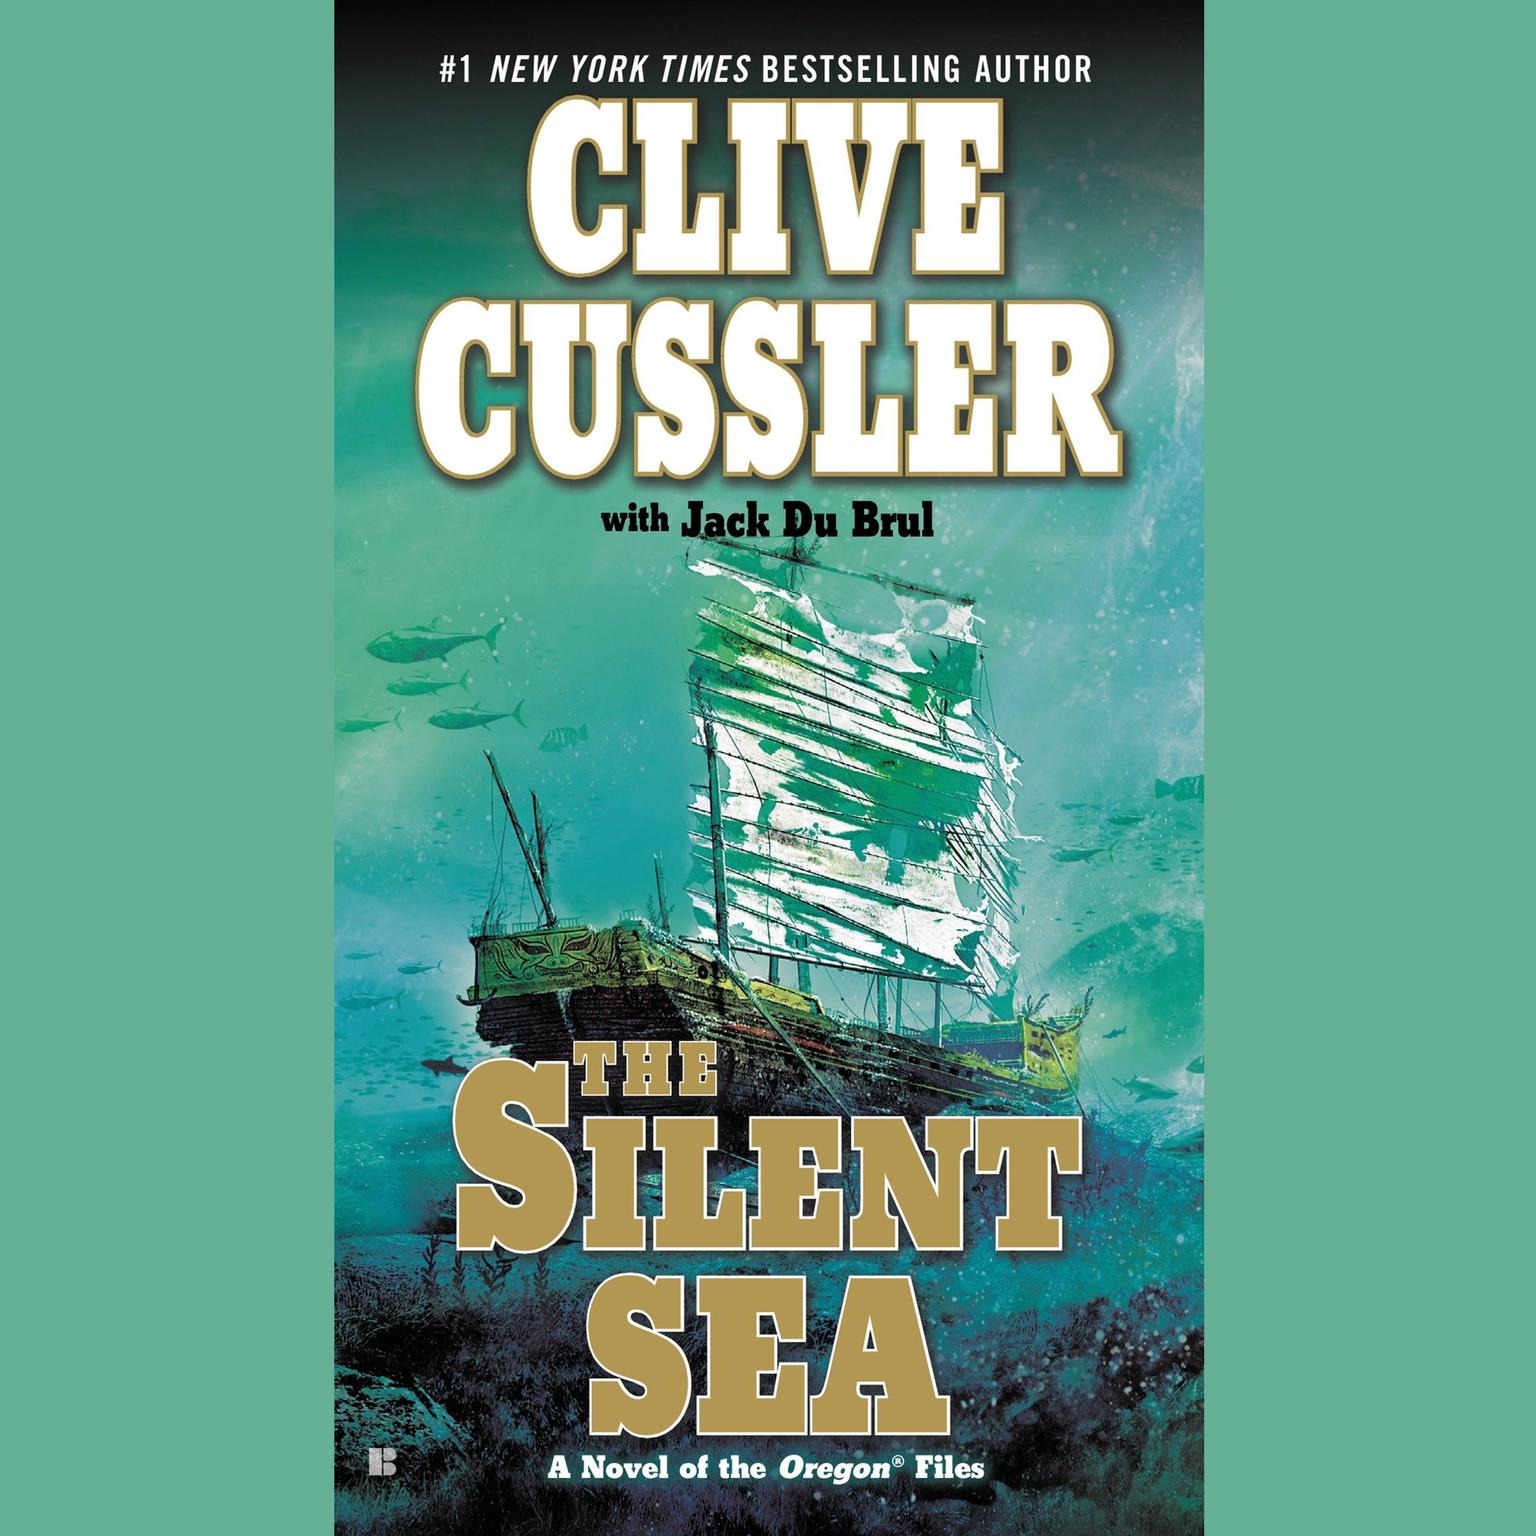 The Silent Sea Audiobook, by Clive Cussler